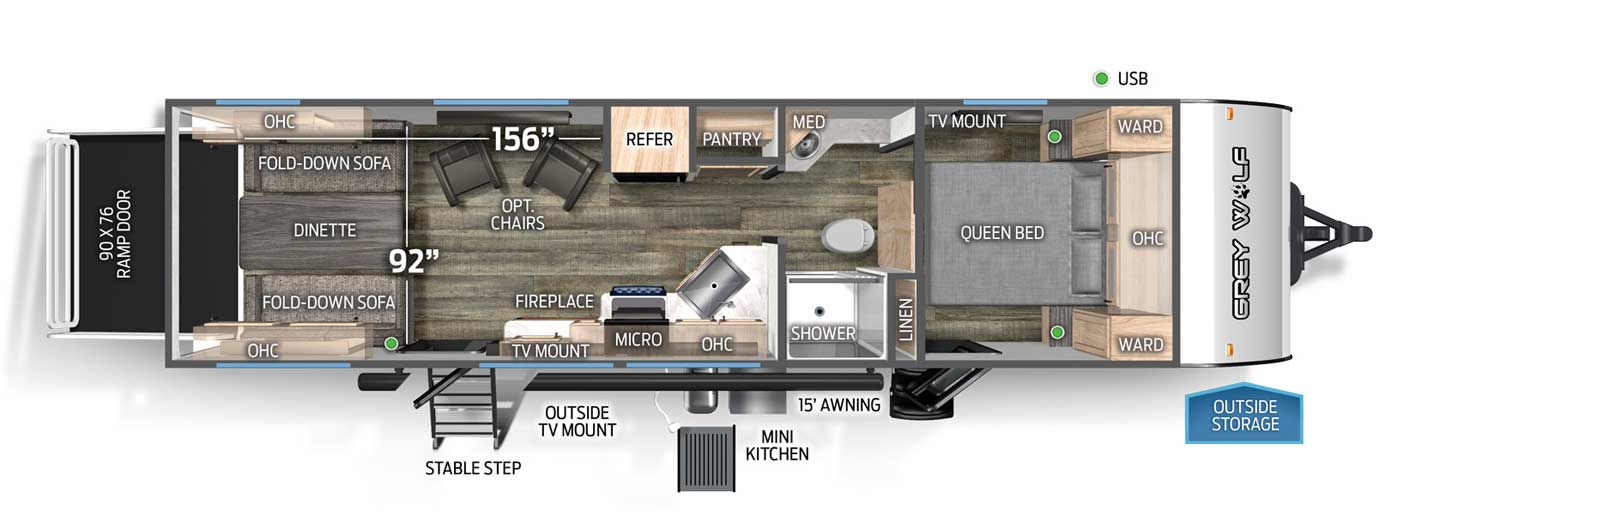 The 24RRT has no slide outs, a rear ramp door, and two entry doors. Exterior features include 15 foot awning, outside TV mount, outside storage, mini kitchen, and stable step on main entry. Interior layout front to back: queen bed with overhead cabinet, wardrobes on either side, off-door side TV mount, door side entry, and linen closet; pass through full bathroom with sink and medicine cabinet on off-door side, and shower and toilet on door side; off-door side pantry, refrigerator, and optional chairs; kitchen countertop with sink wraps from inner wall to door side with overhead cabinet, cooktop, microwave, fireplace with TV mount above, and main entry; rear opposing wall fold down sofas with overhead cabinets, and dinette table. Cargo area measurements: 156 inches from the rear of the trailer to the refrigerator; 92 inches from off-door side wall to door side wall; 90 inch by 76 inch rear ramp door.